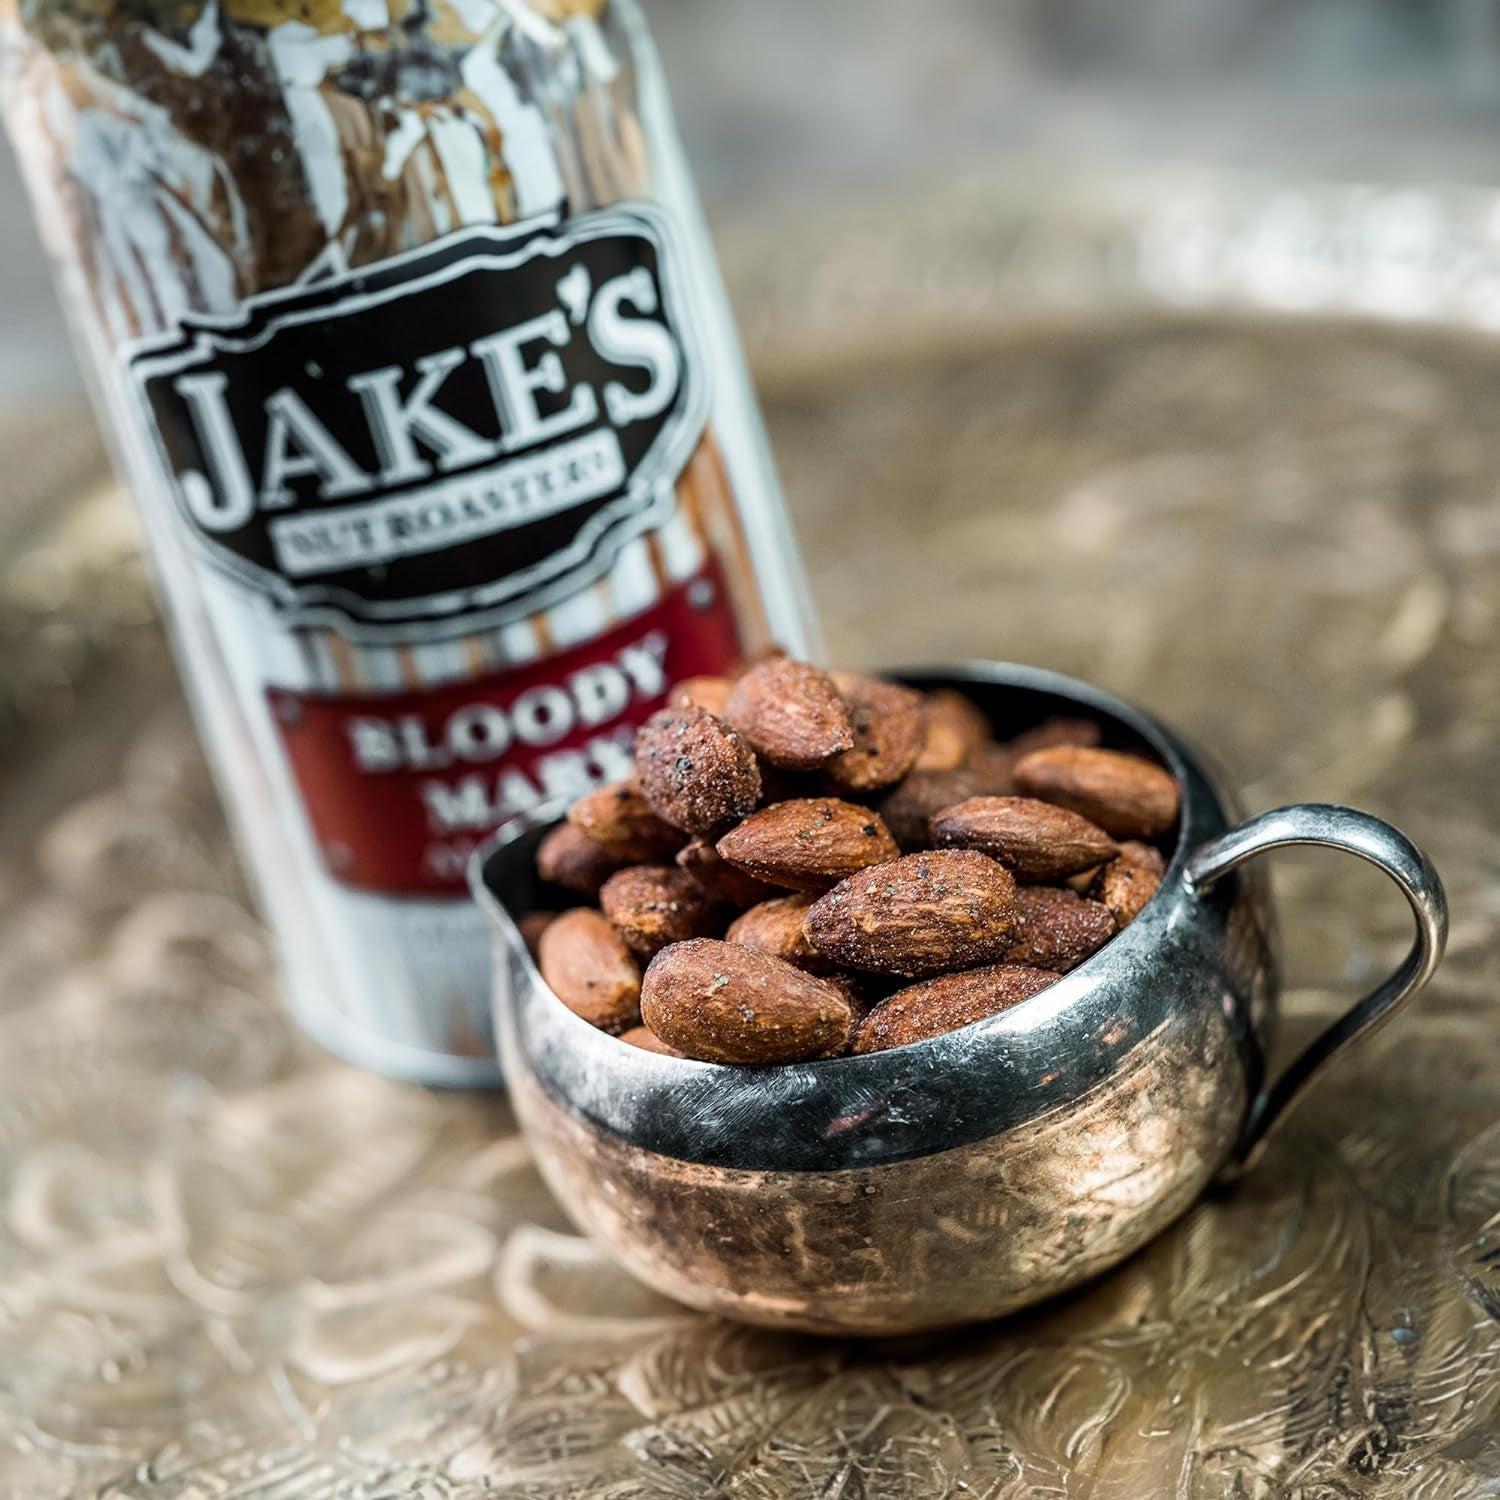 - Variety Pack of Almonds (6 Pack) Whole Dry Roasted Seasoned Flavored Almonds - Includes Bloody Mary, Mesquite Smoked, Bleu Cheese, Hatch Chile, Barbecue and Maple Flavors